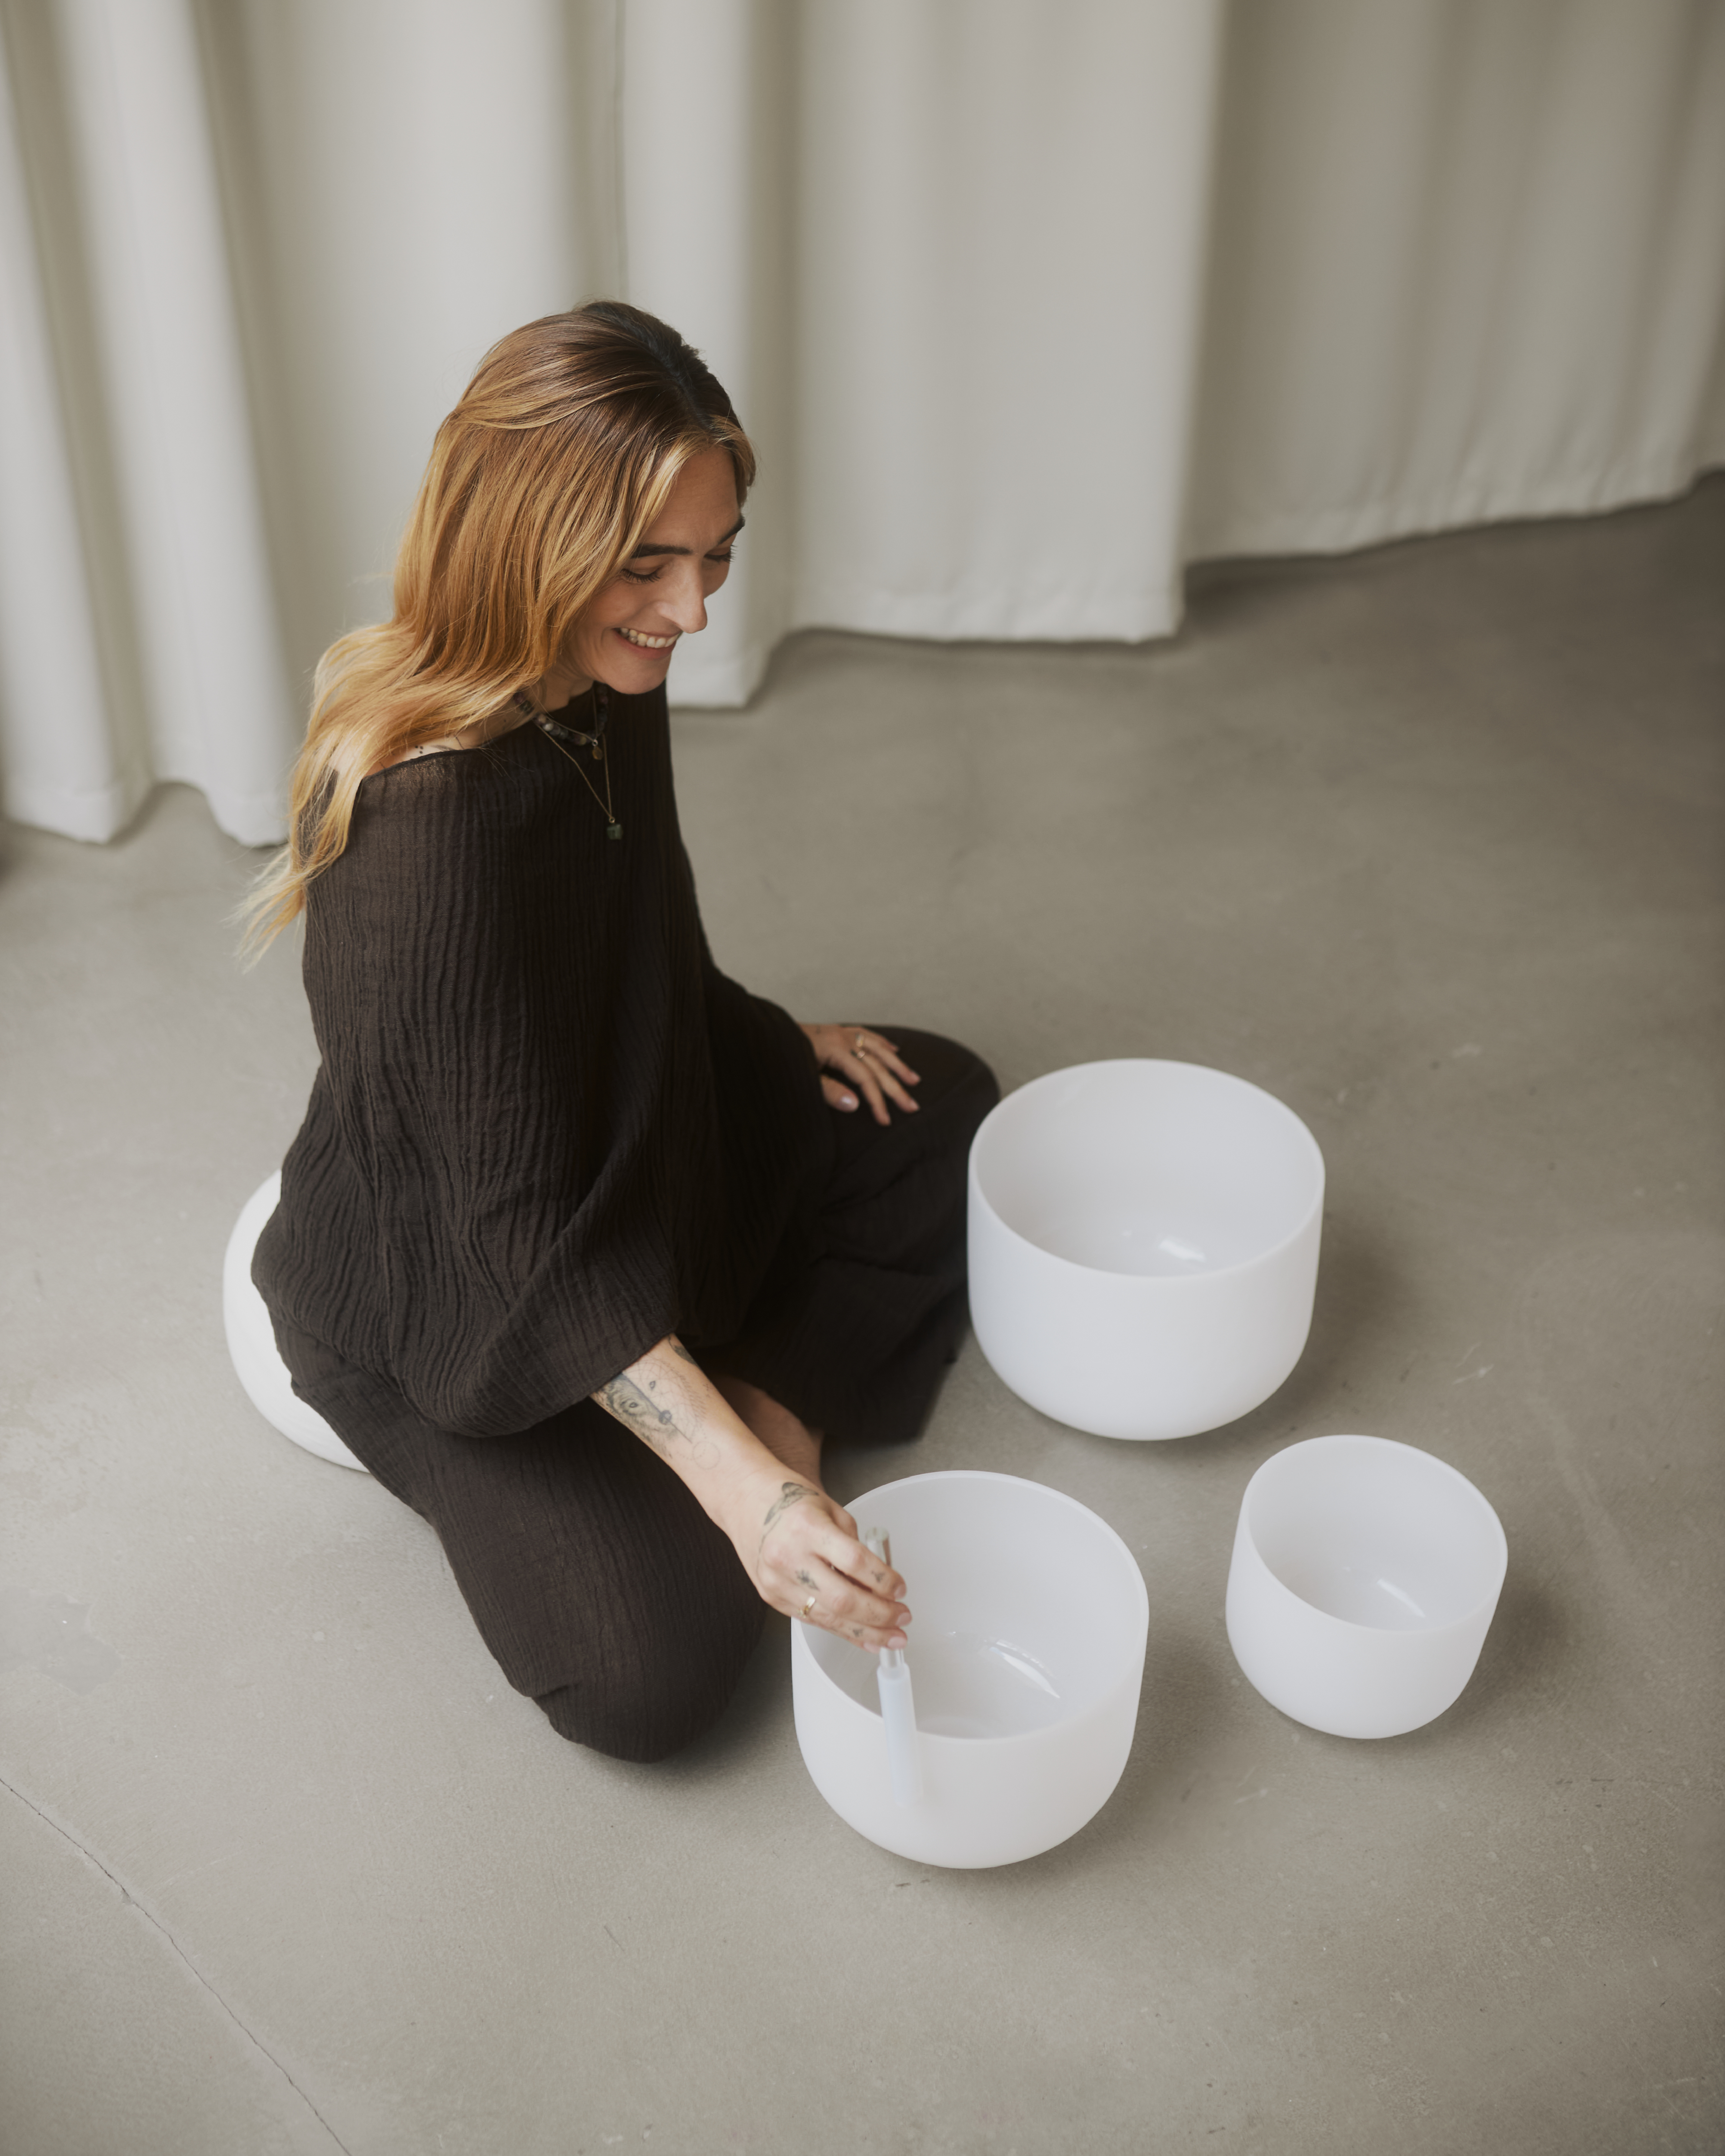 a woman sitting on the floor with white bowls